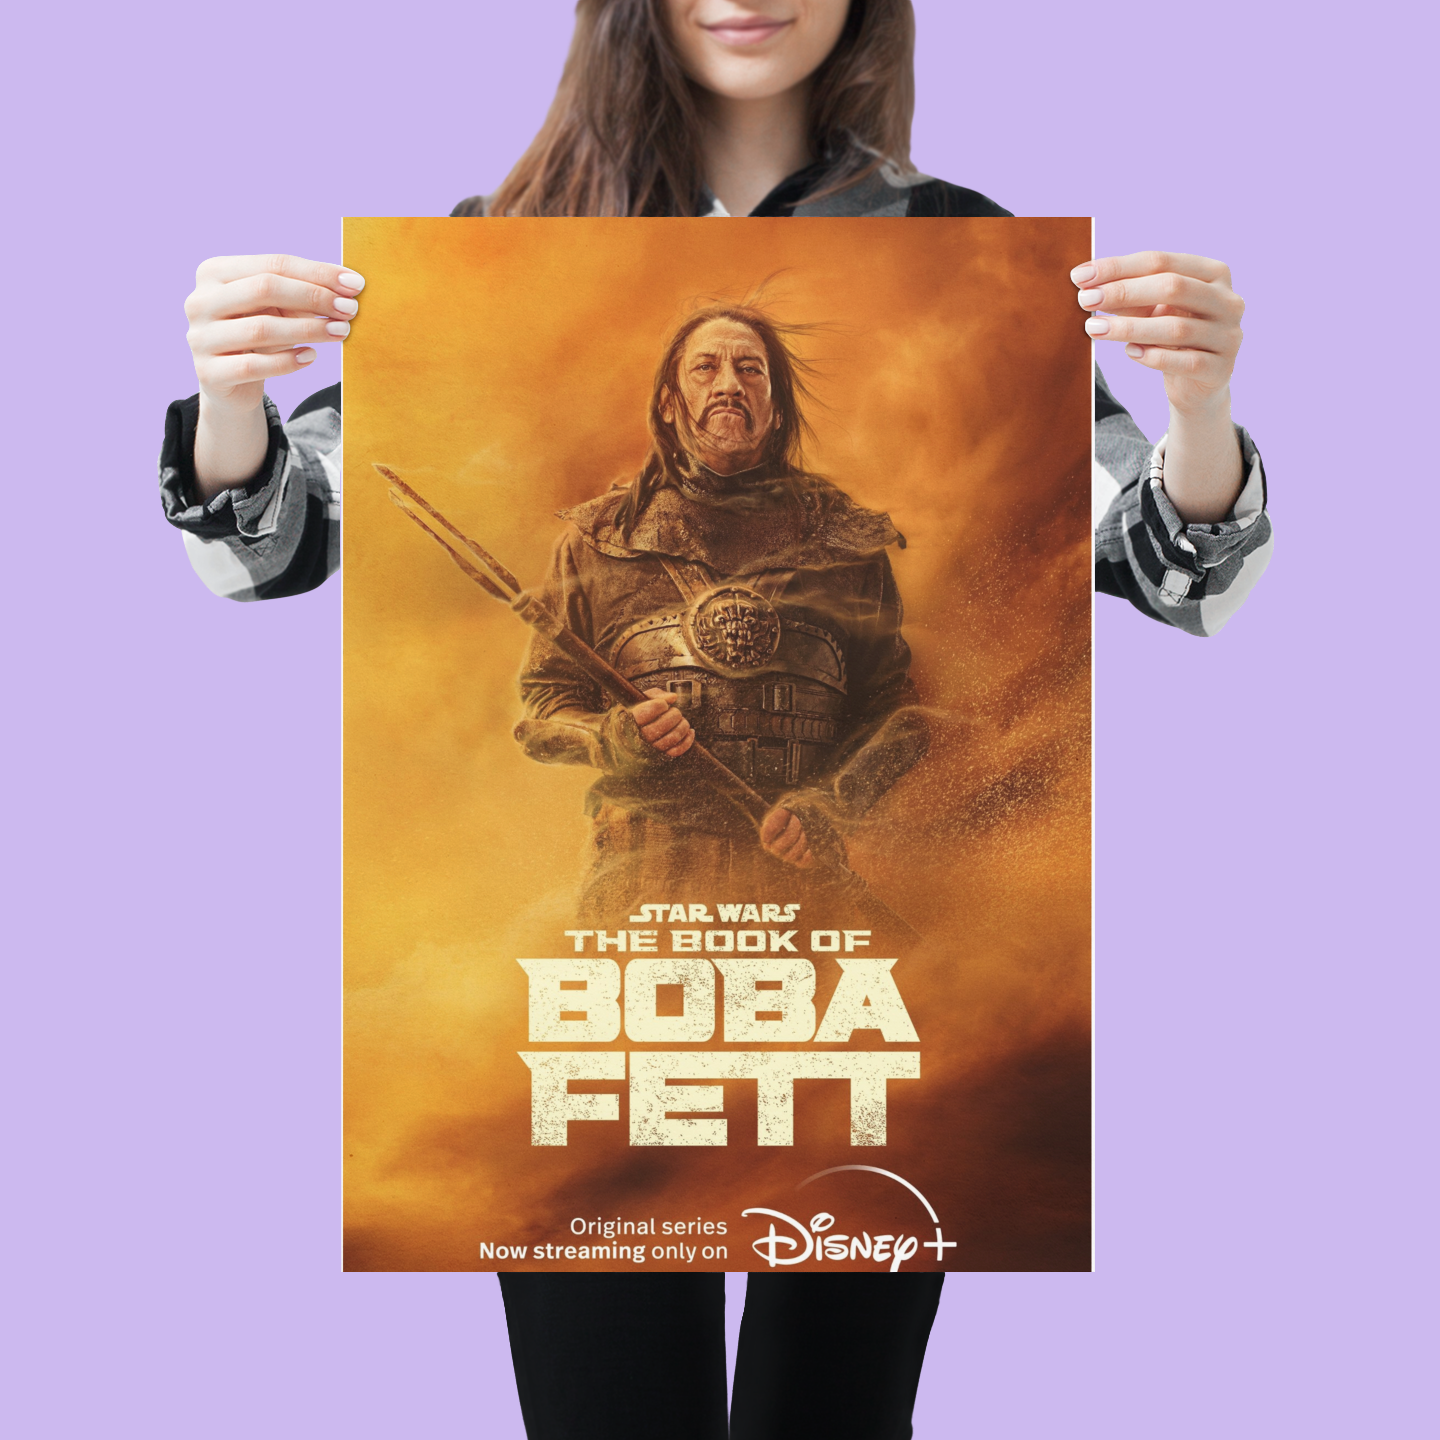 Star Wars The Book Of Show Fett - Boba (Danny Posters TV Trejo, Poster Rancor Keeper) Lost